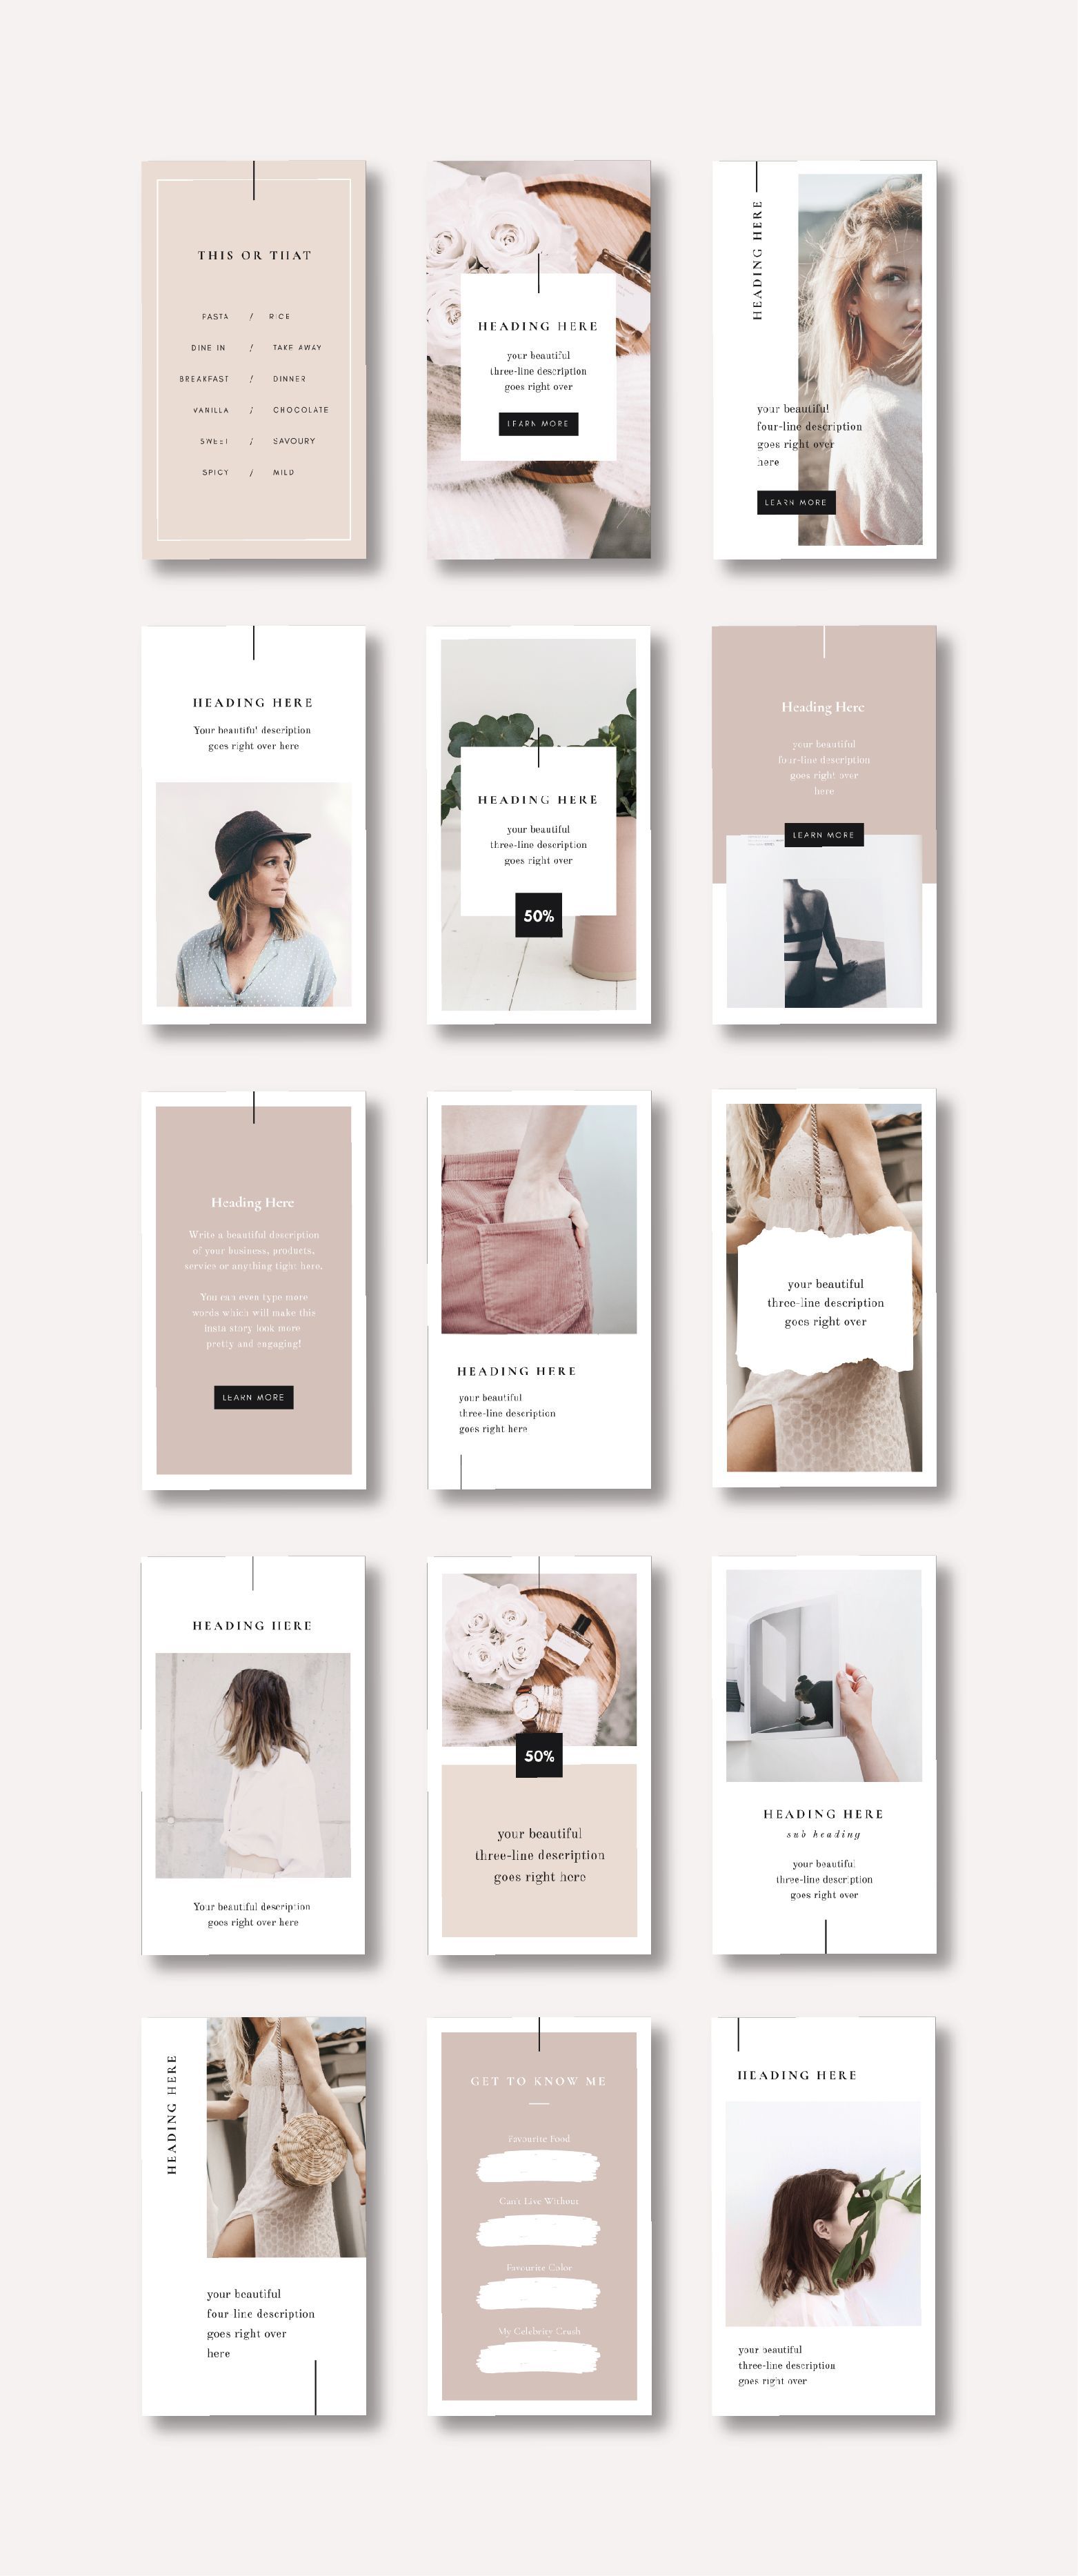 Instagram Stories Template for Canva | Canva Template | Instagram Story Template - Instagram Stories Template for Canva | Canva Template | Instagram Story Template -   9 beauty Products flyer ideas